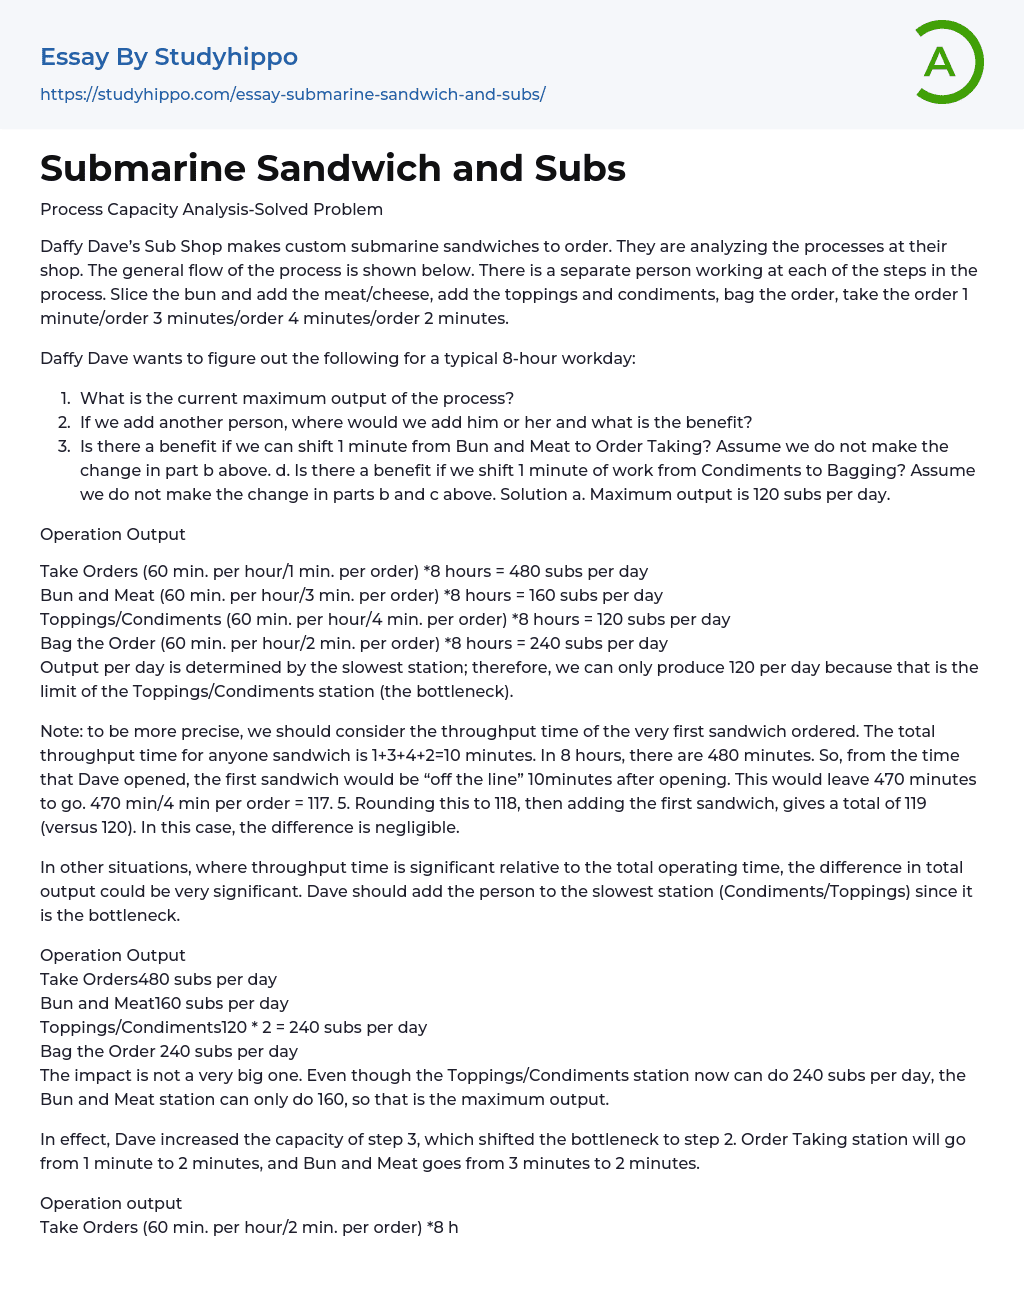 Submarine Sandwich and Subs Essay Example